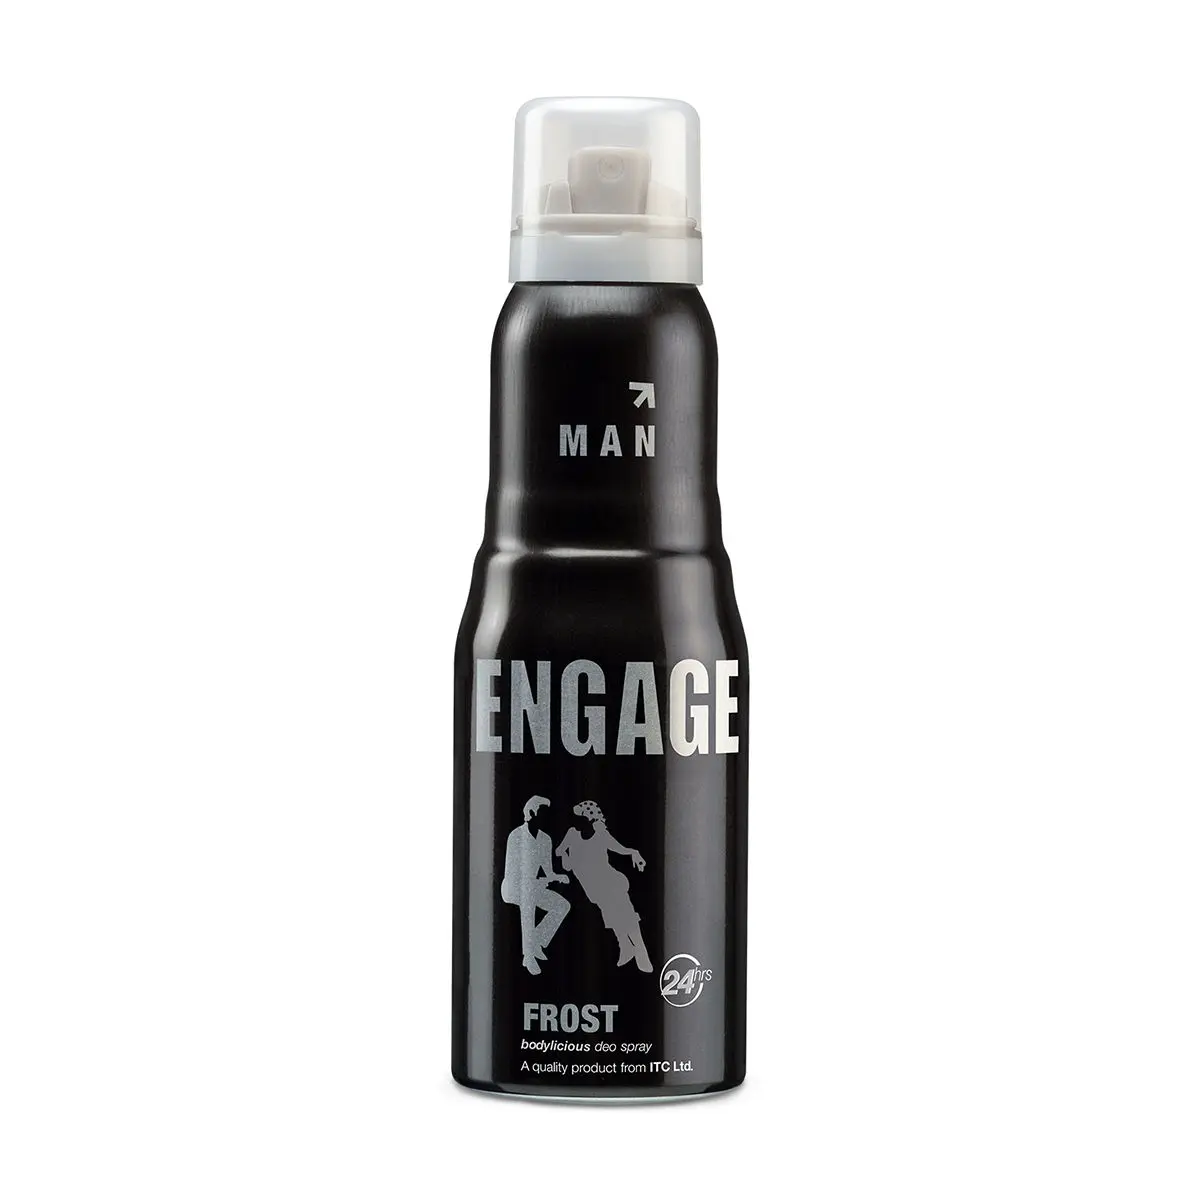 Engage Frost Deodorant For Men, Citrus and Spicy, Skin Friendly, 165 ml